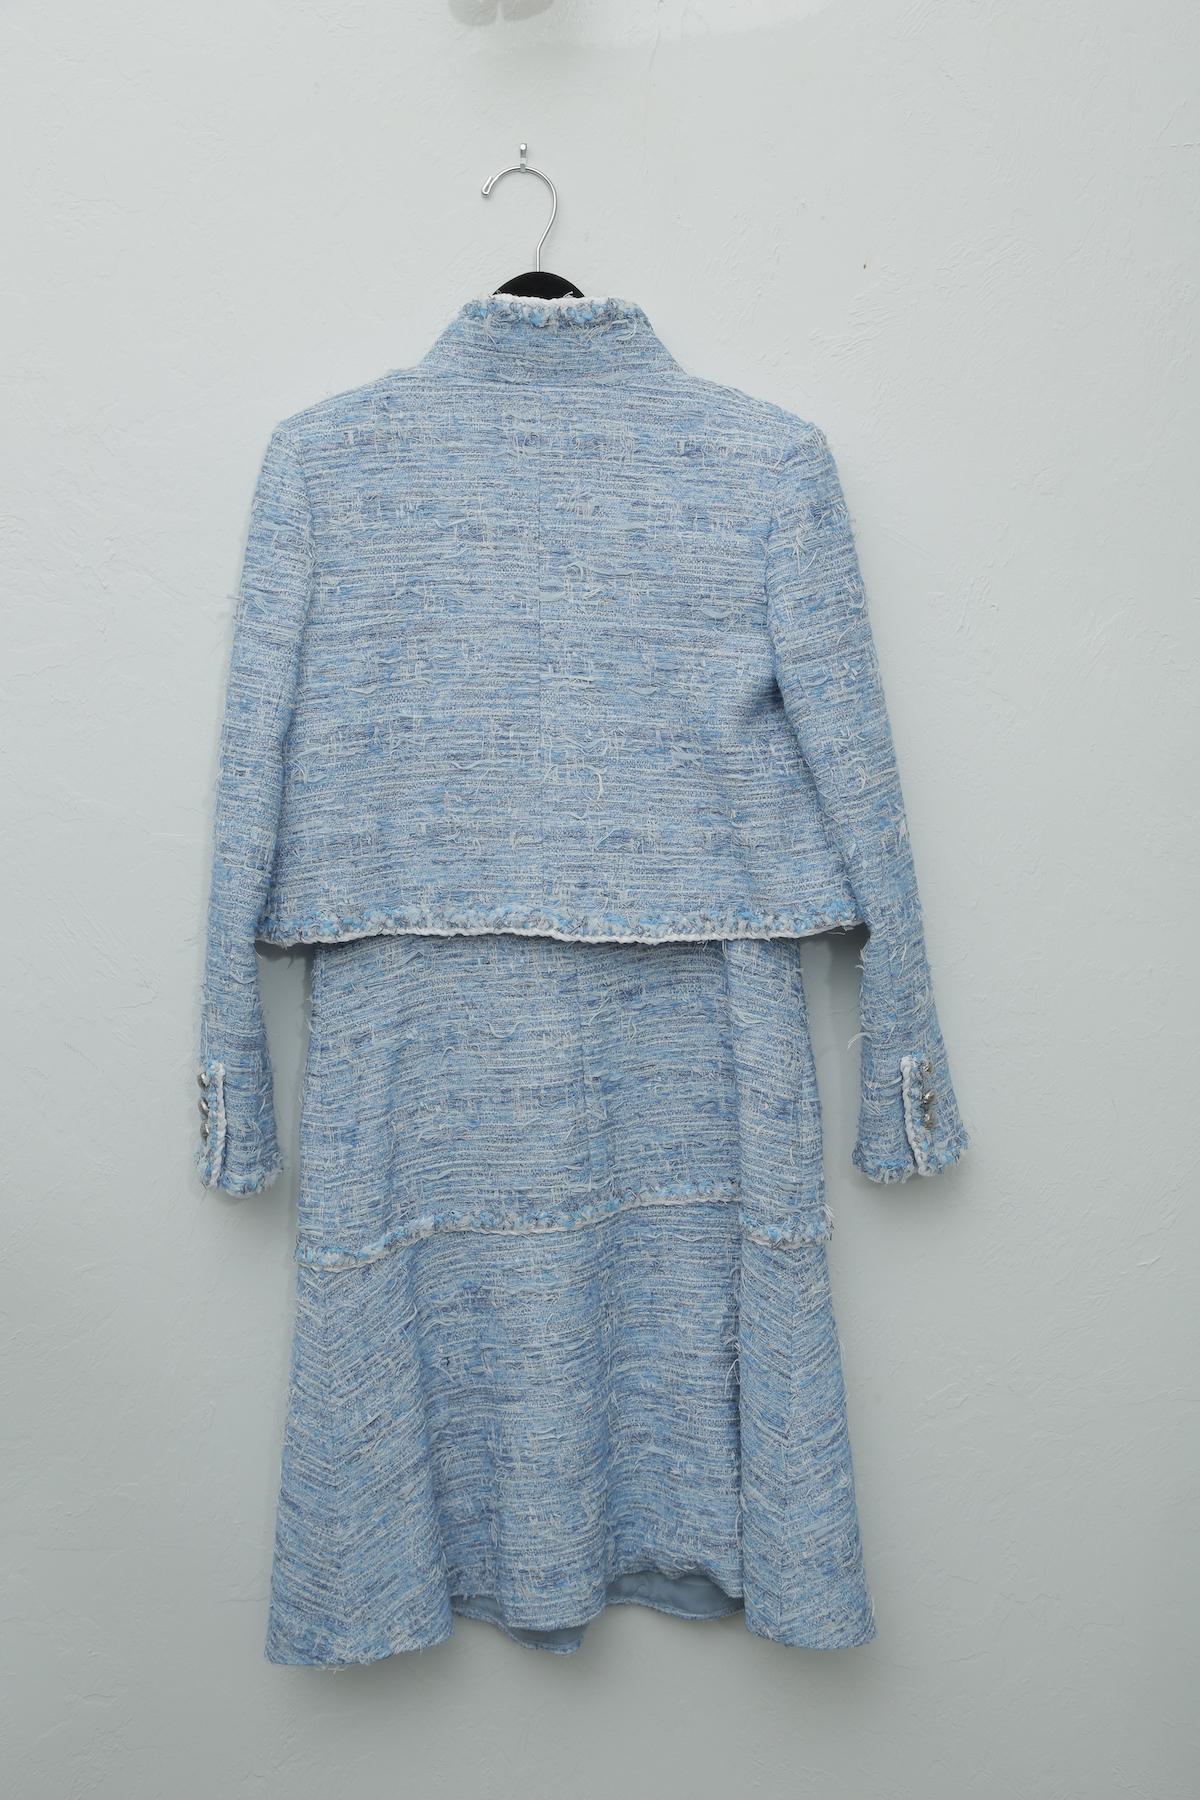 Chanel Blue Baby Tweed with Matching Jacket Cocktail Dress 2